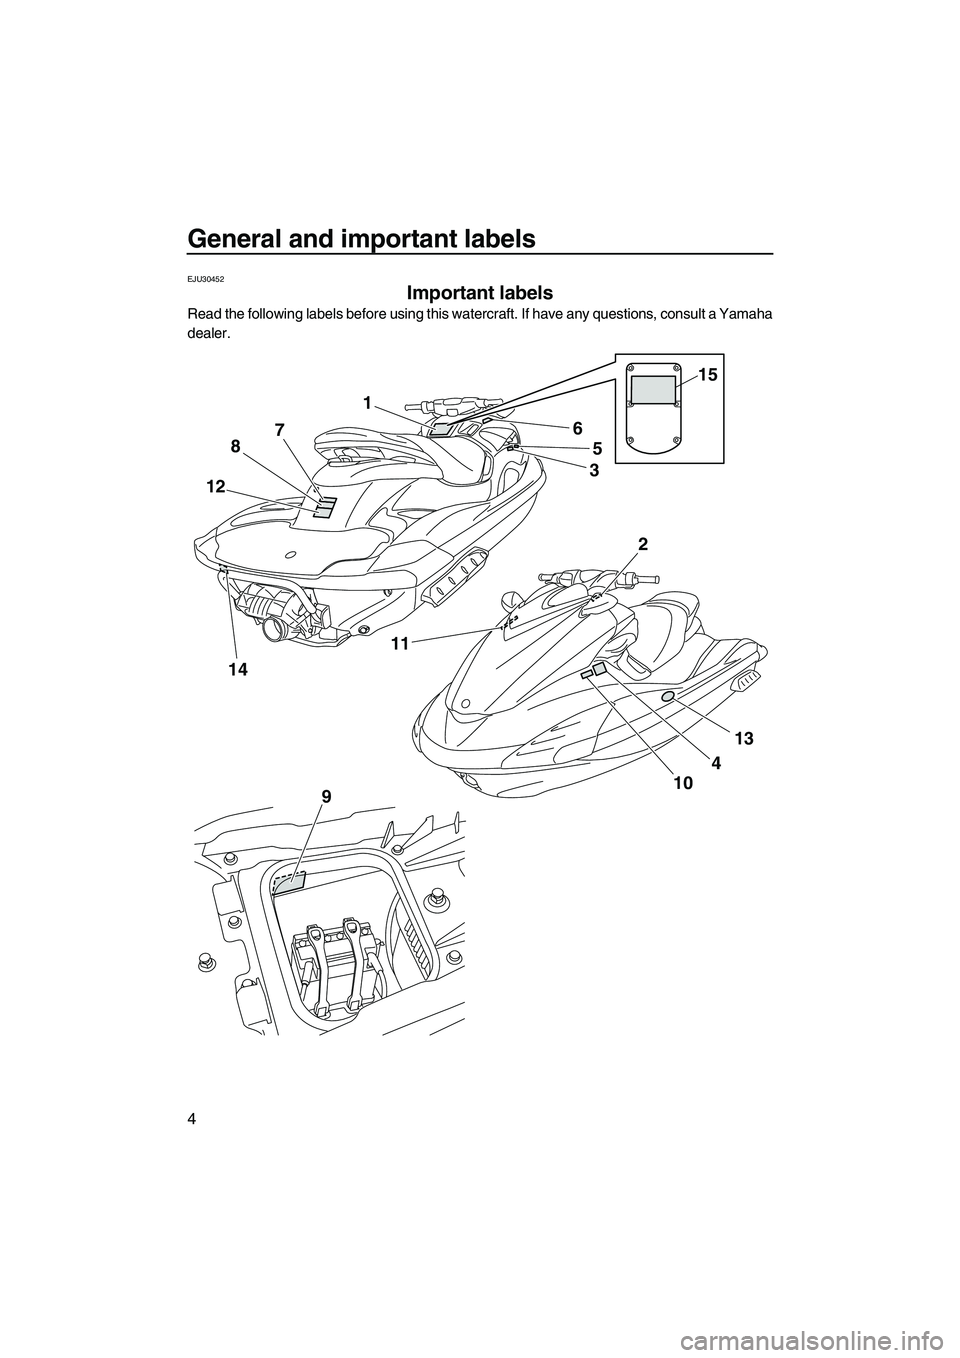 YAMAHA FZS 2013  Owners Manual General and important labels
4
EJU30452
Important labels 
Read the following labels before using this watercraft. If have any questions, consult a Yamaha
dealer.
15
3
4
10
6
8 7
12
14 11
13
2
9
15
UF2